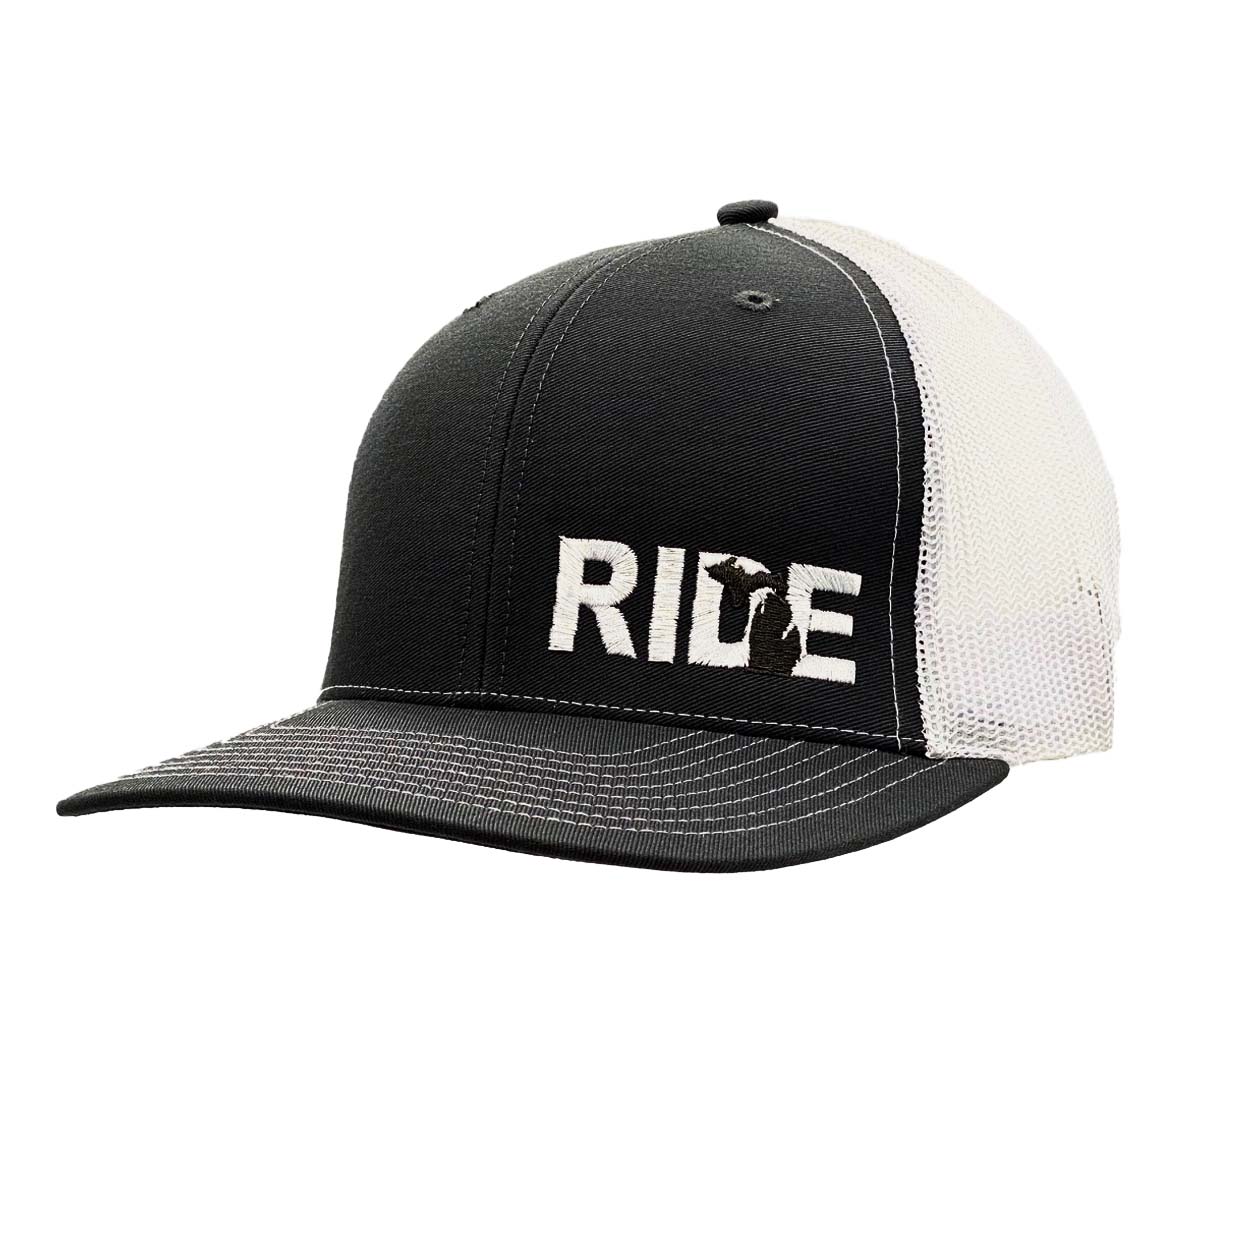 Ride Michigan Night Out Pro Embroidered Snapback Trucker Hat Black/Gray